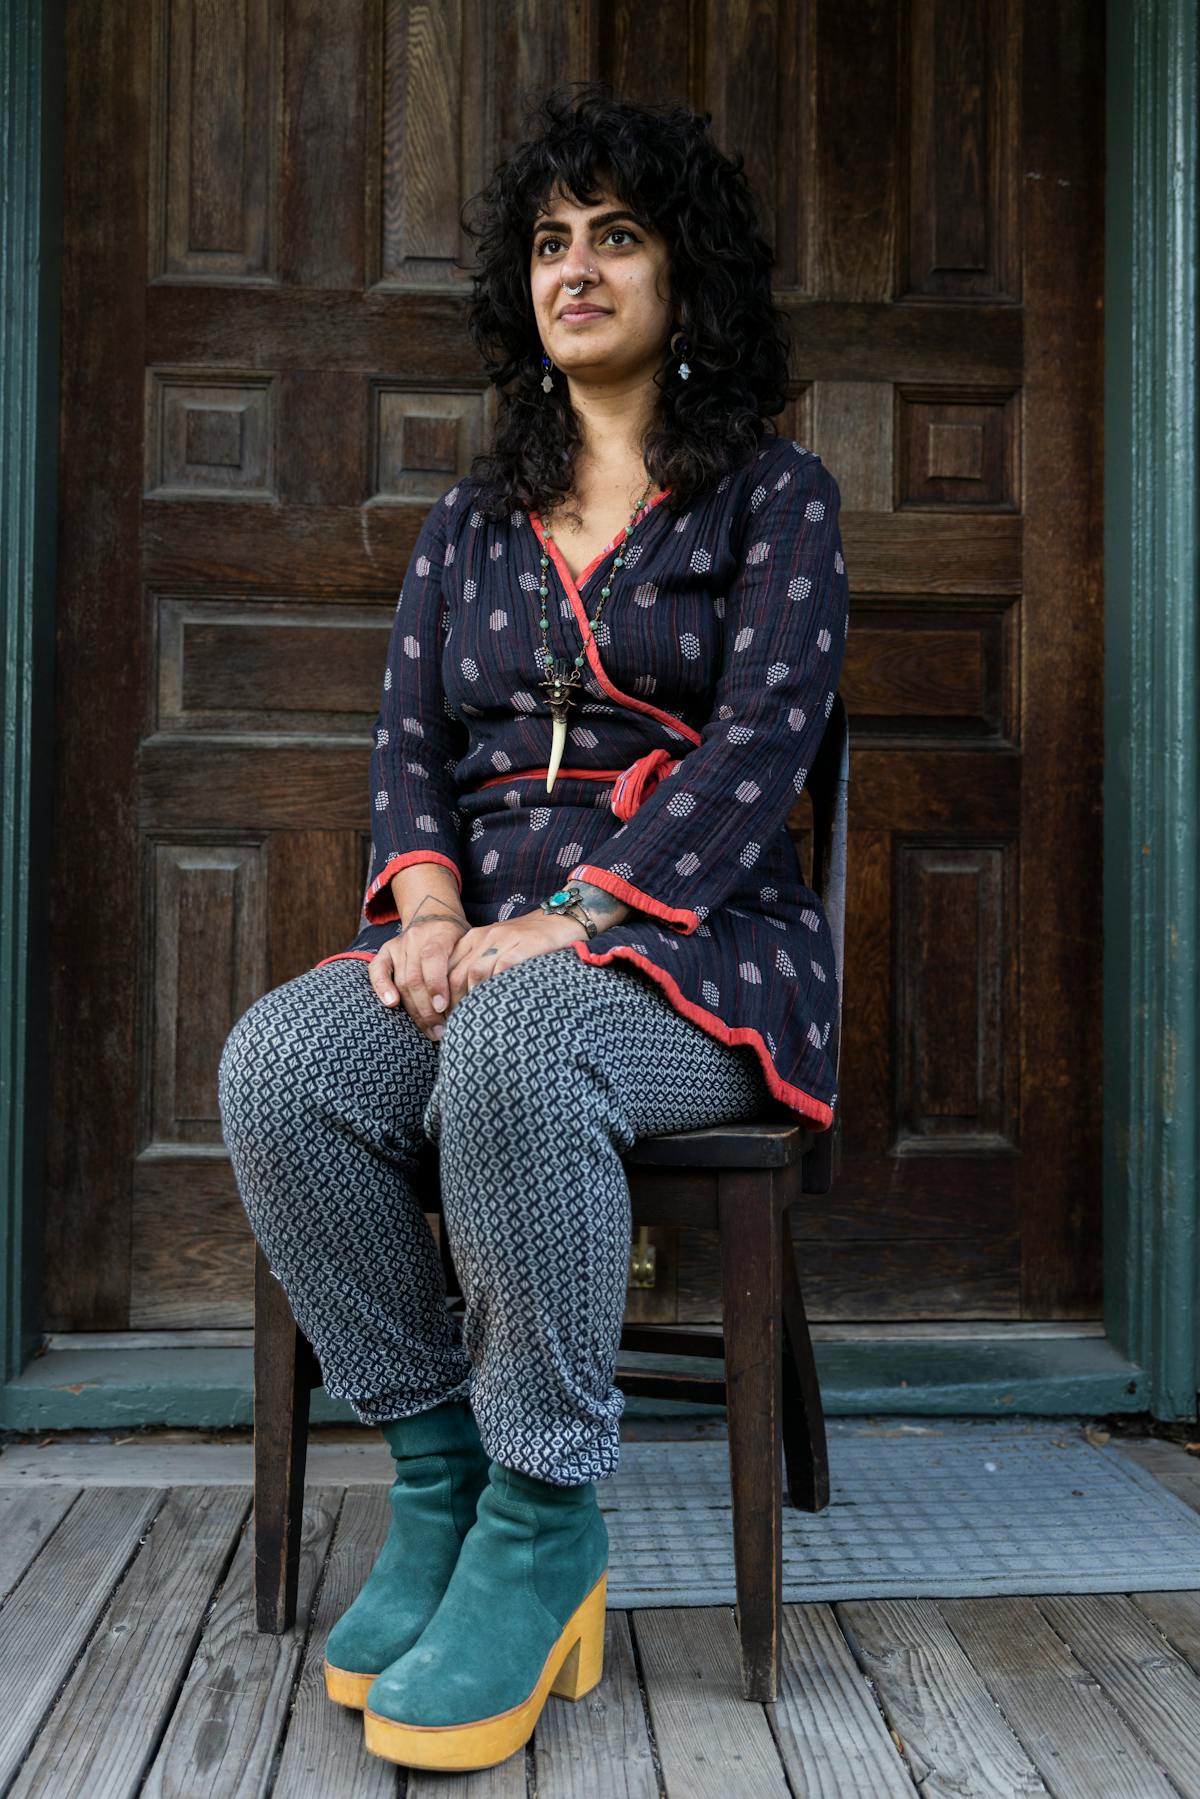 portrait of artist enyo farabi seated on a chair in front of a wooden door